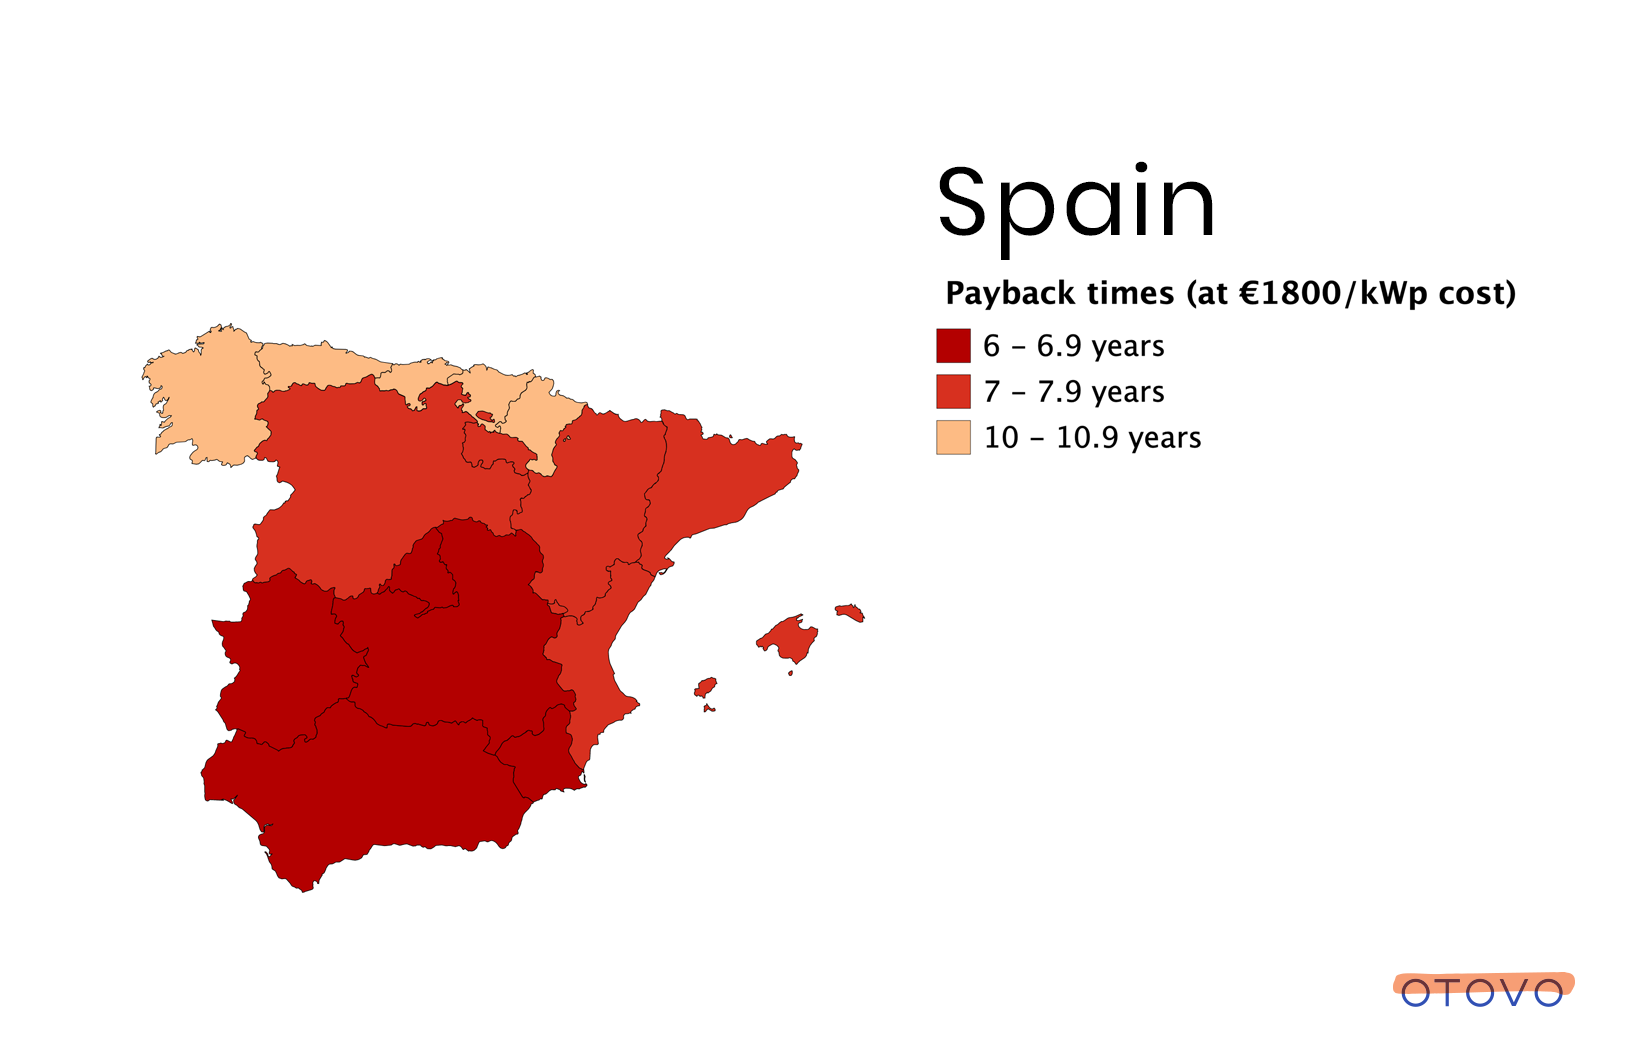 Spain is among the European countries with best meteorological conditions for solar energy.